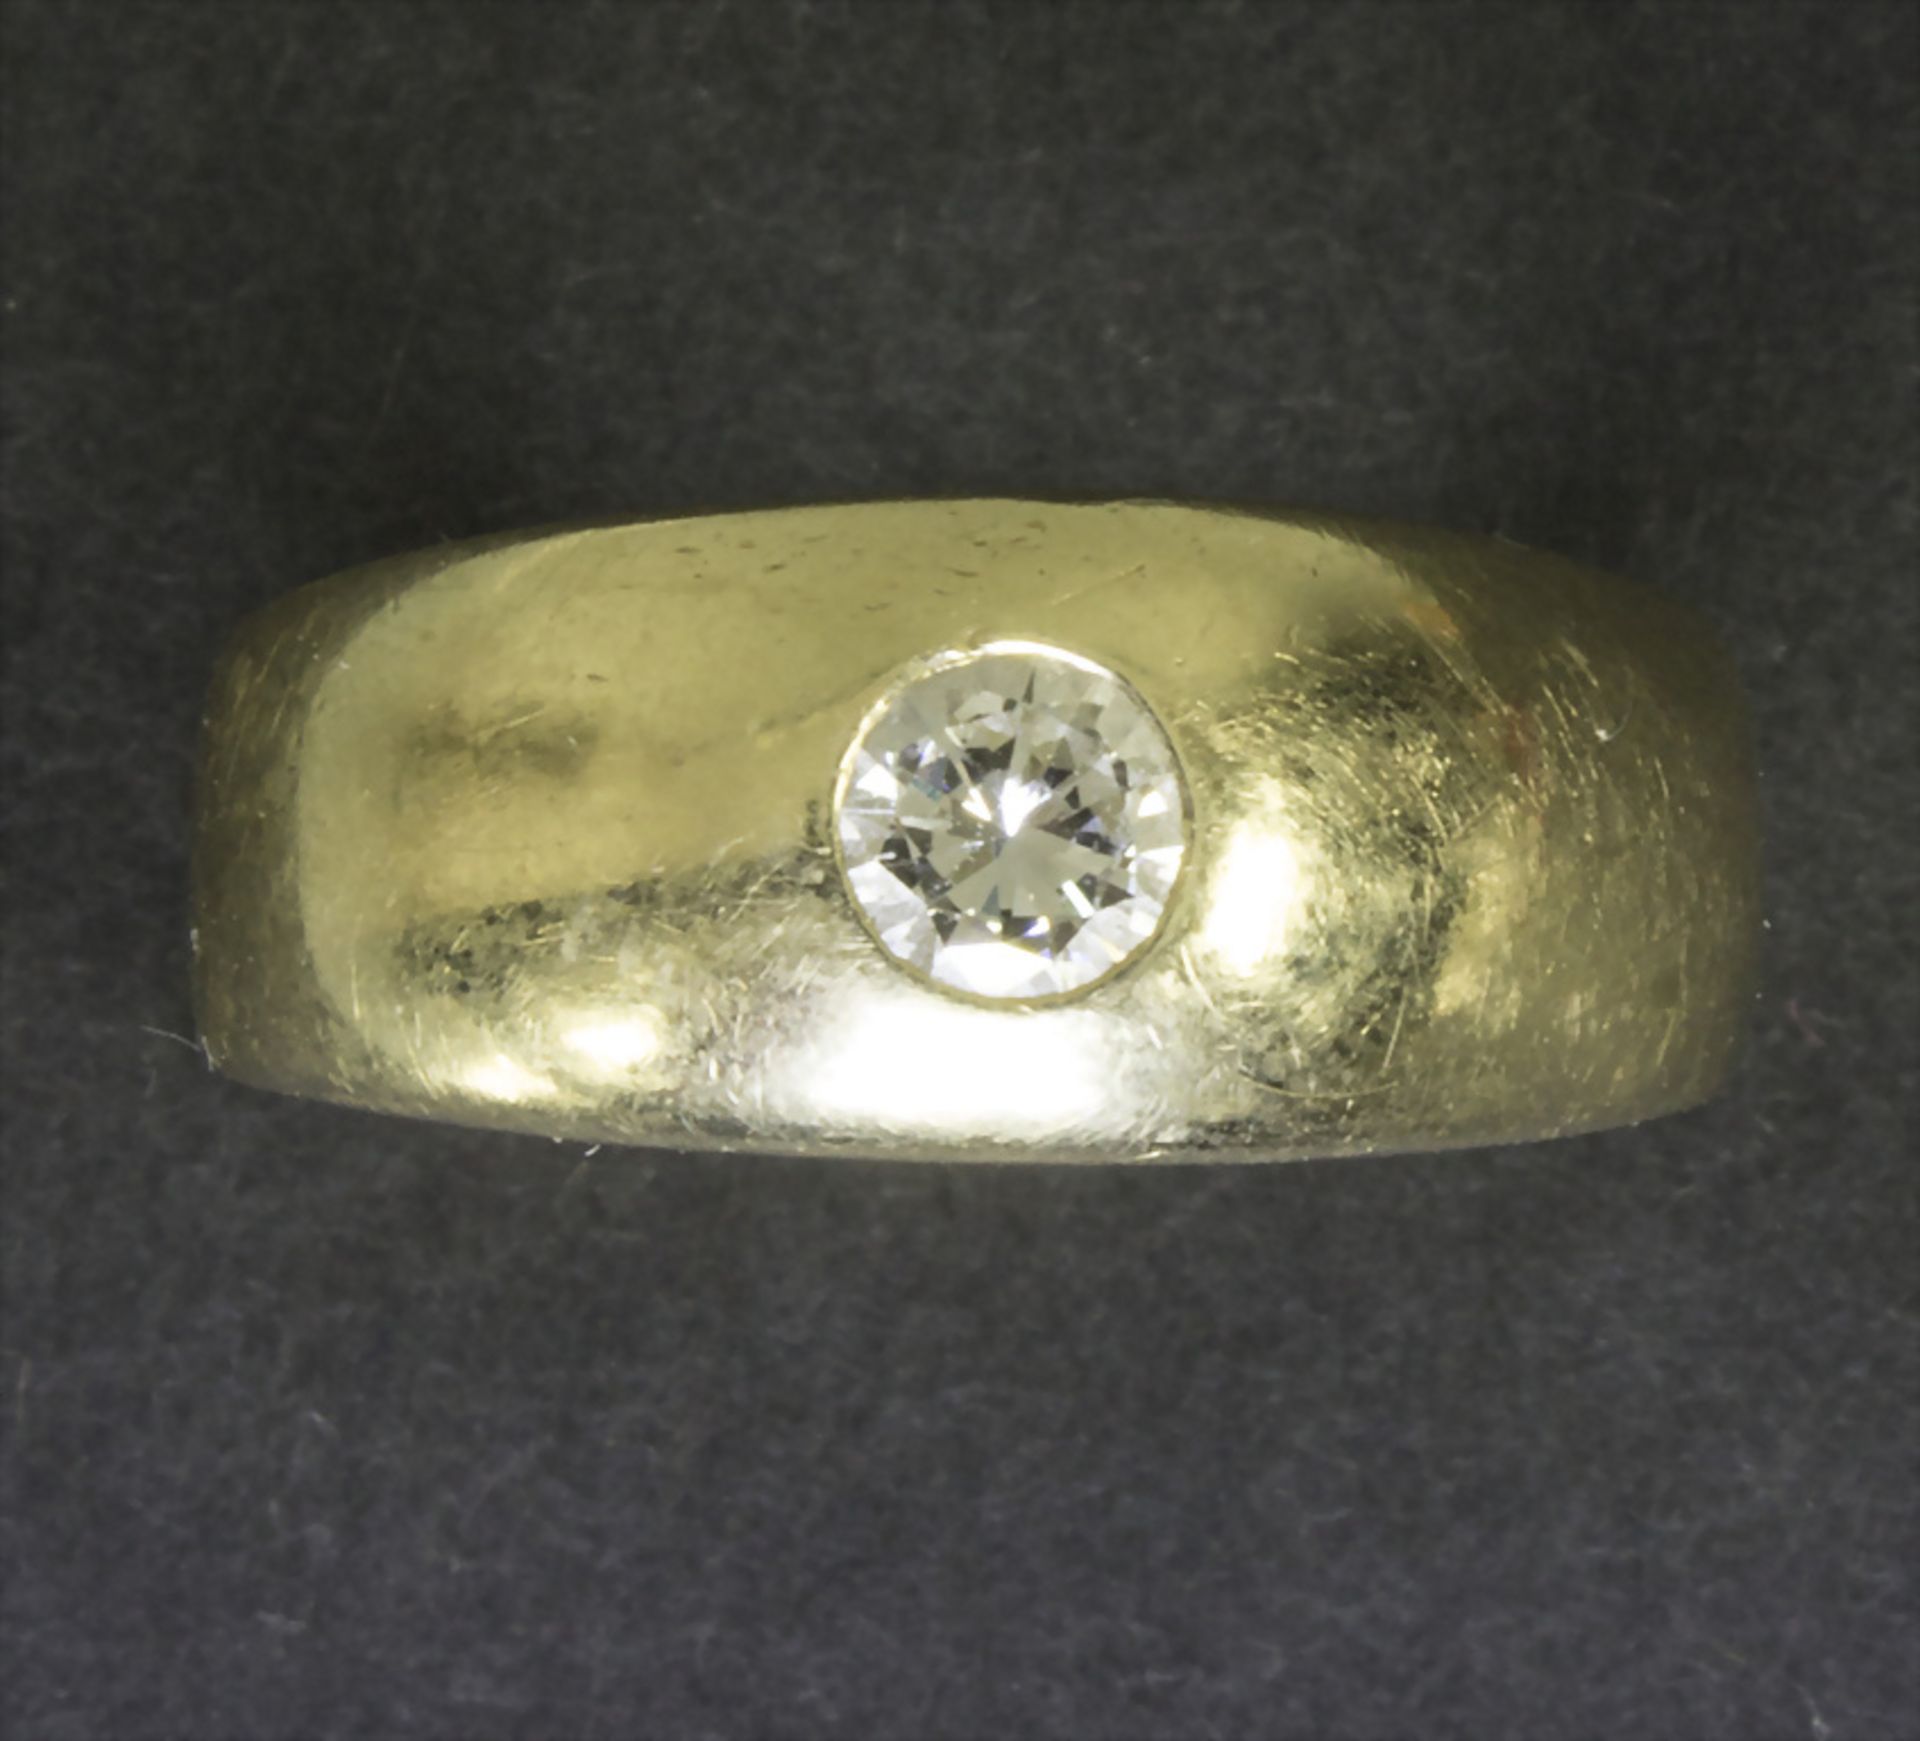 Brilliant Solitärring / An 18k gold ring with brilliant solitaire